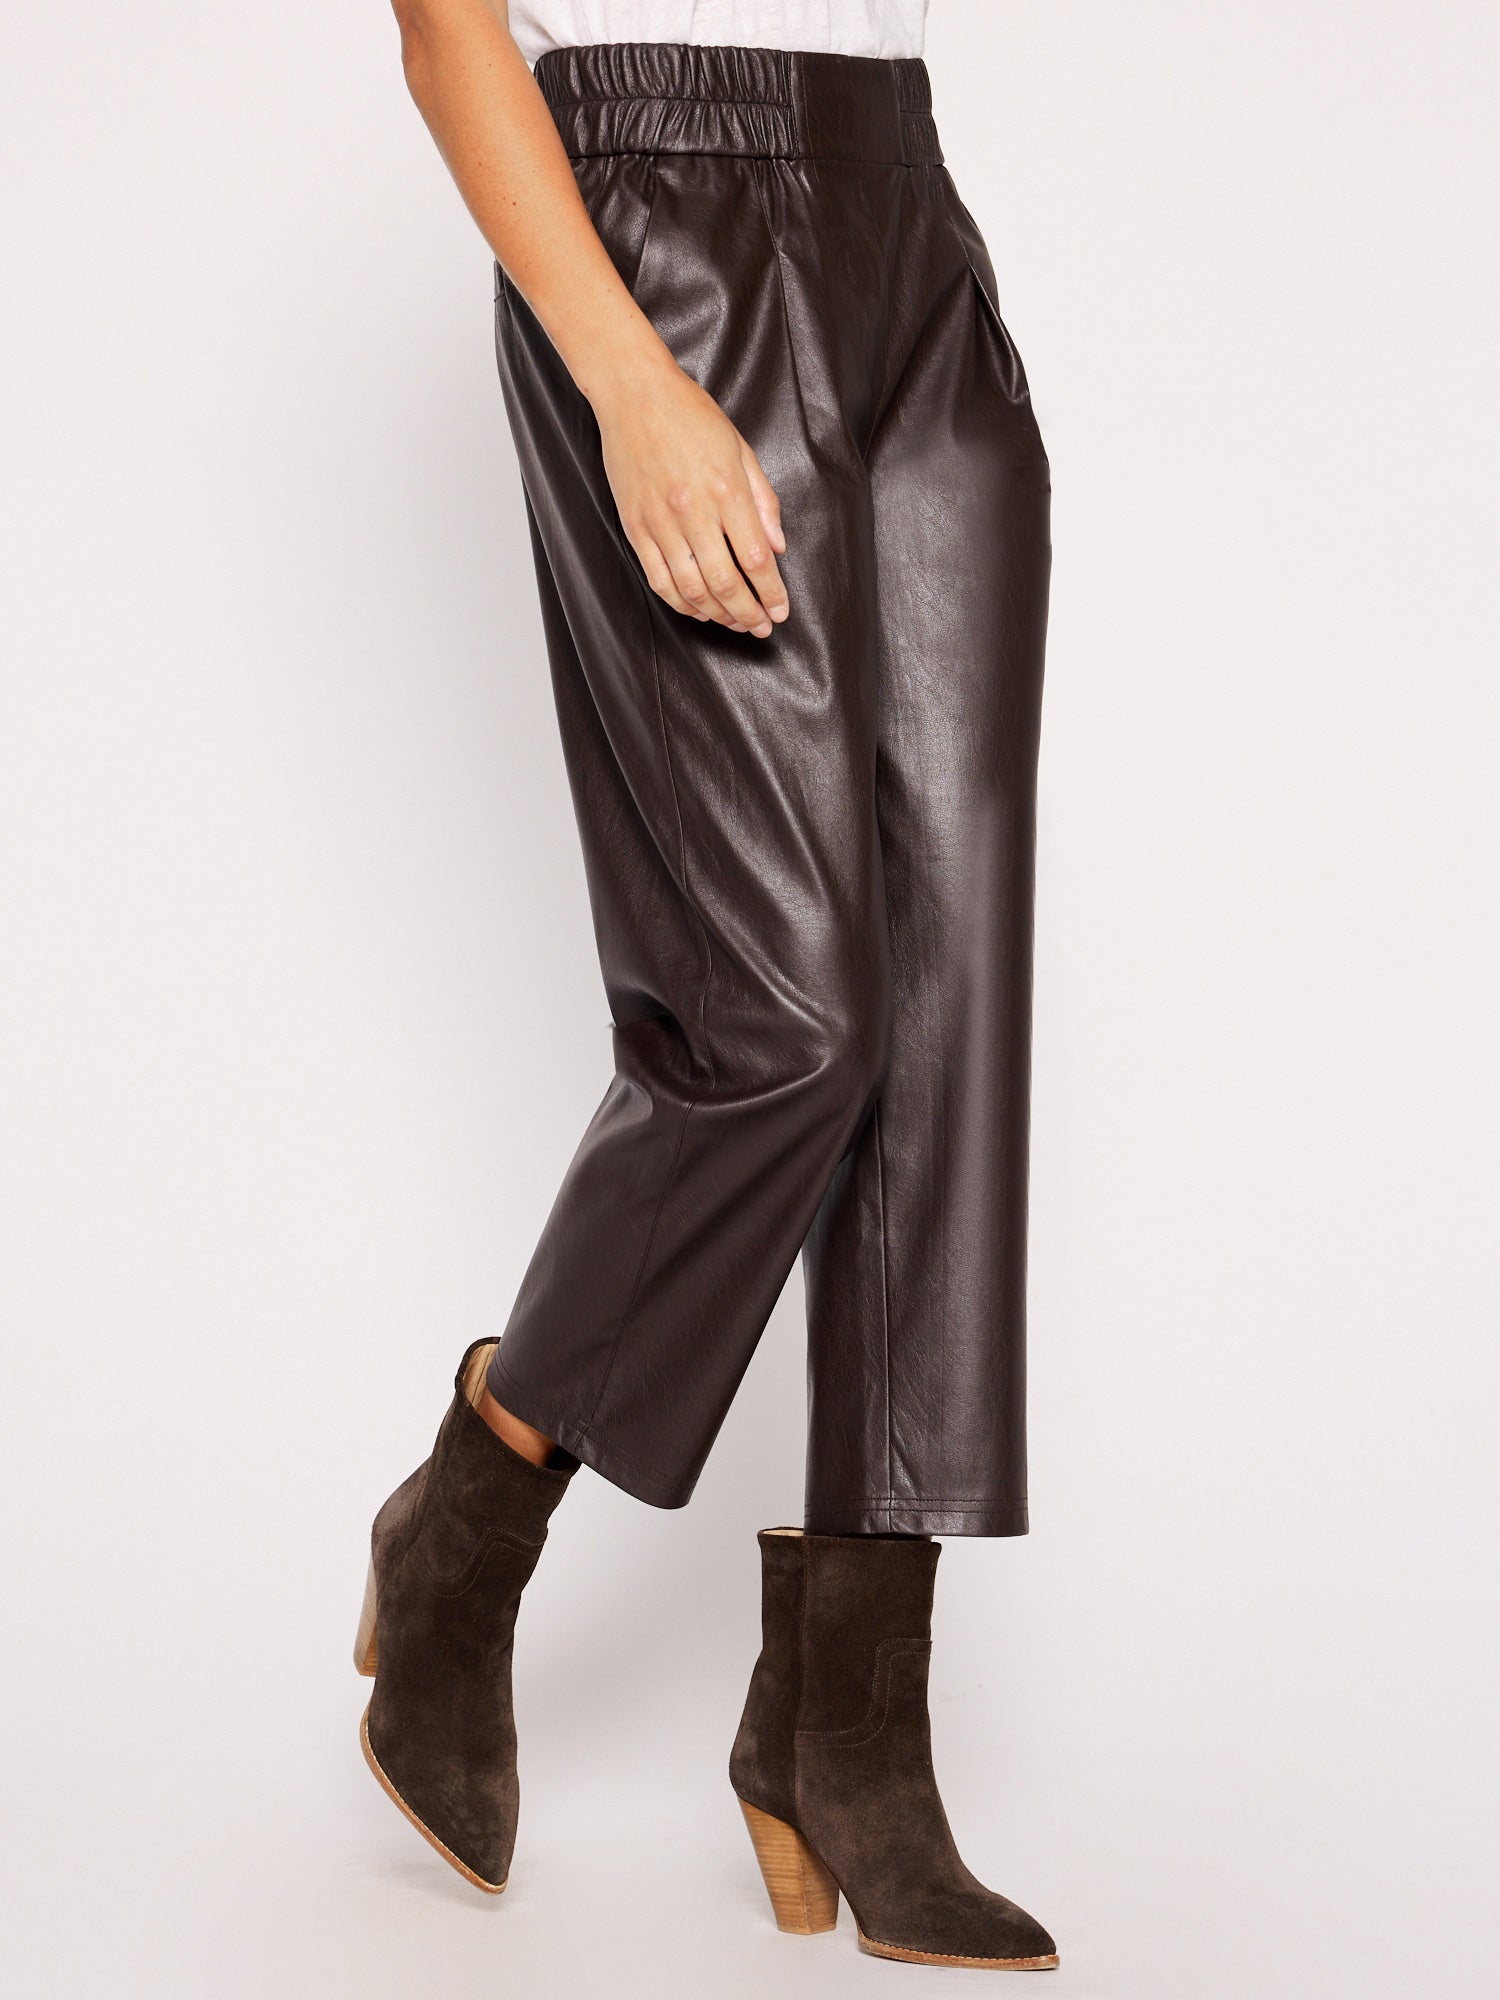 Fiera brown vegan leather cropped pant side view